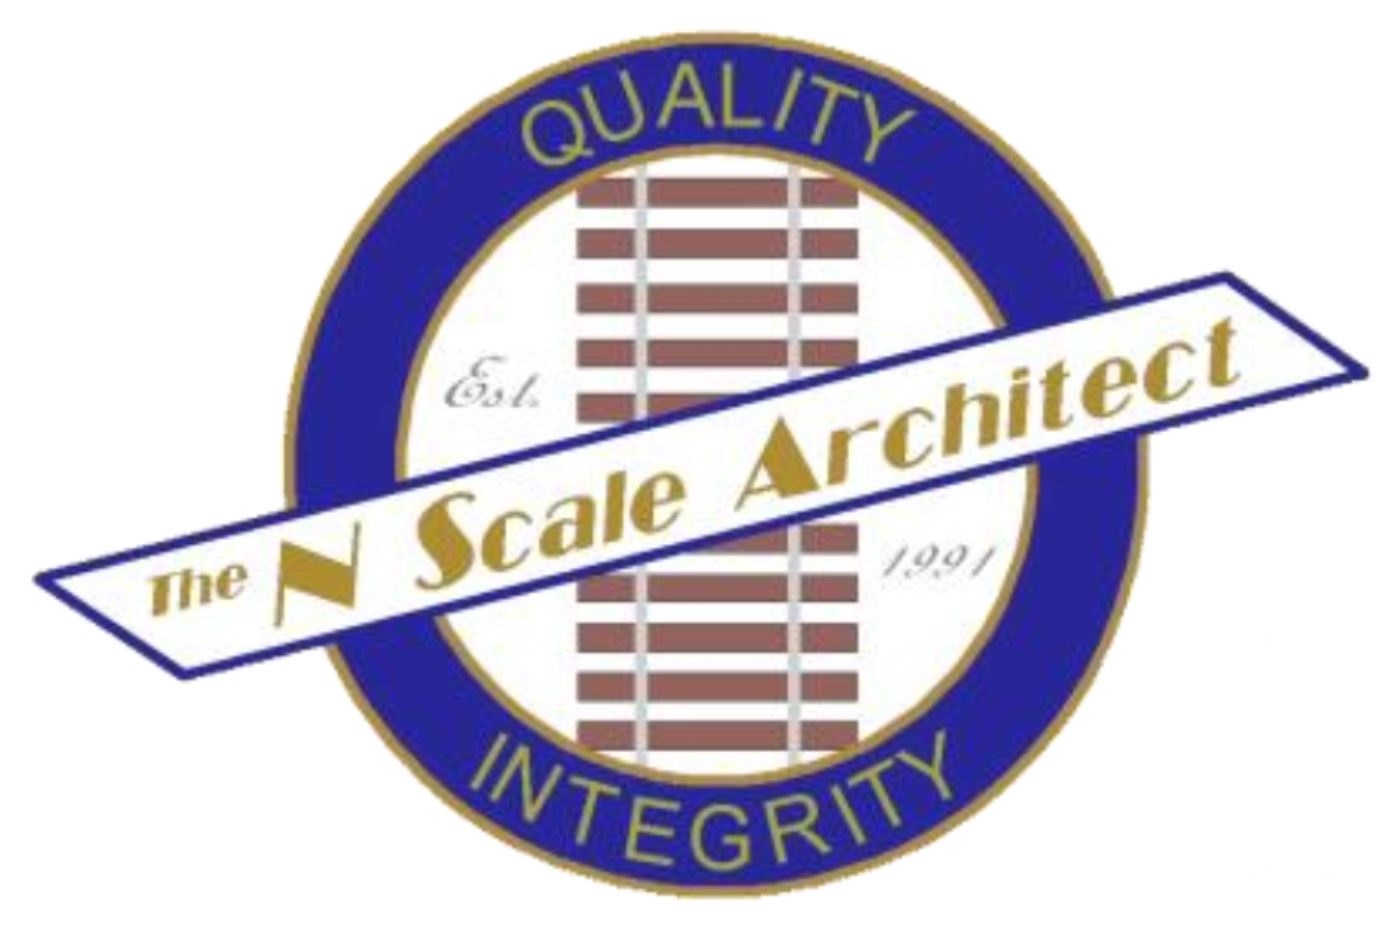 The N Scale Architect Logo